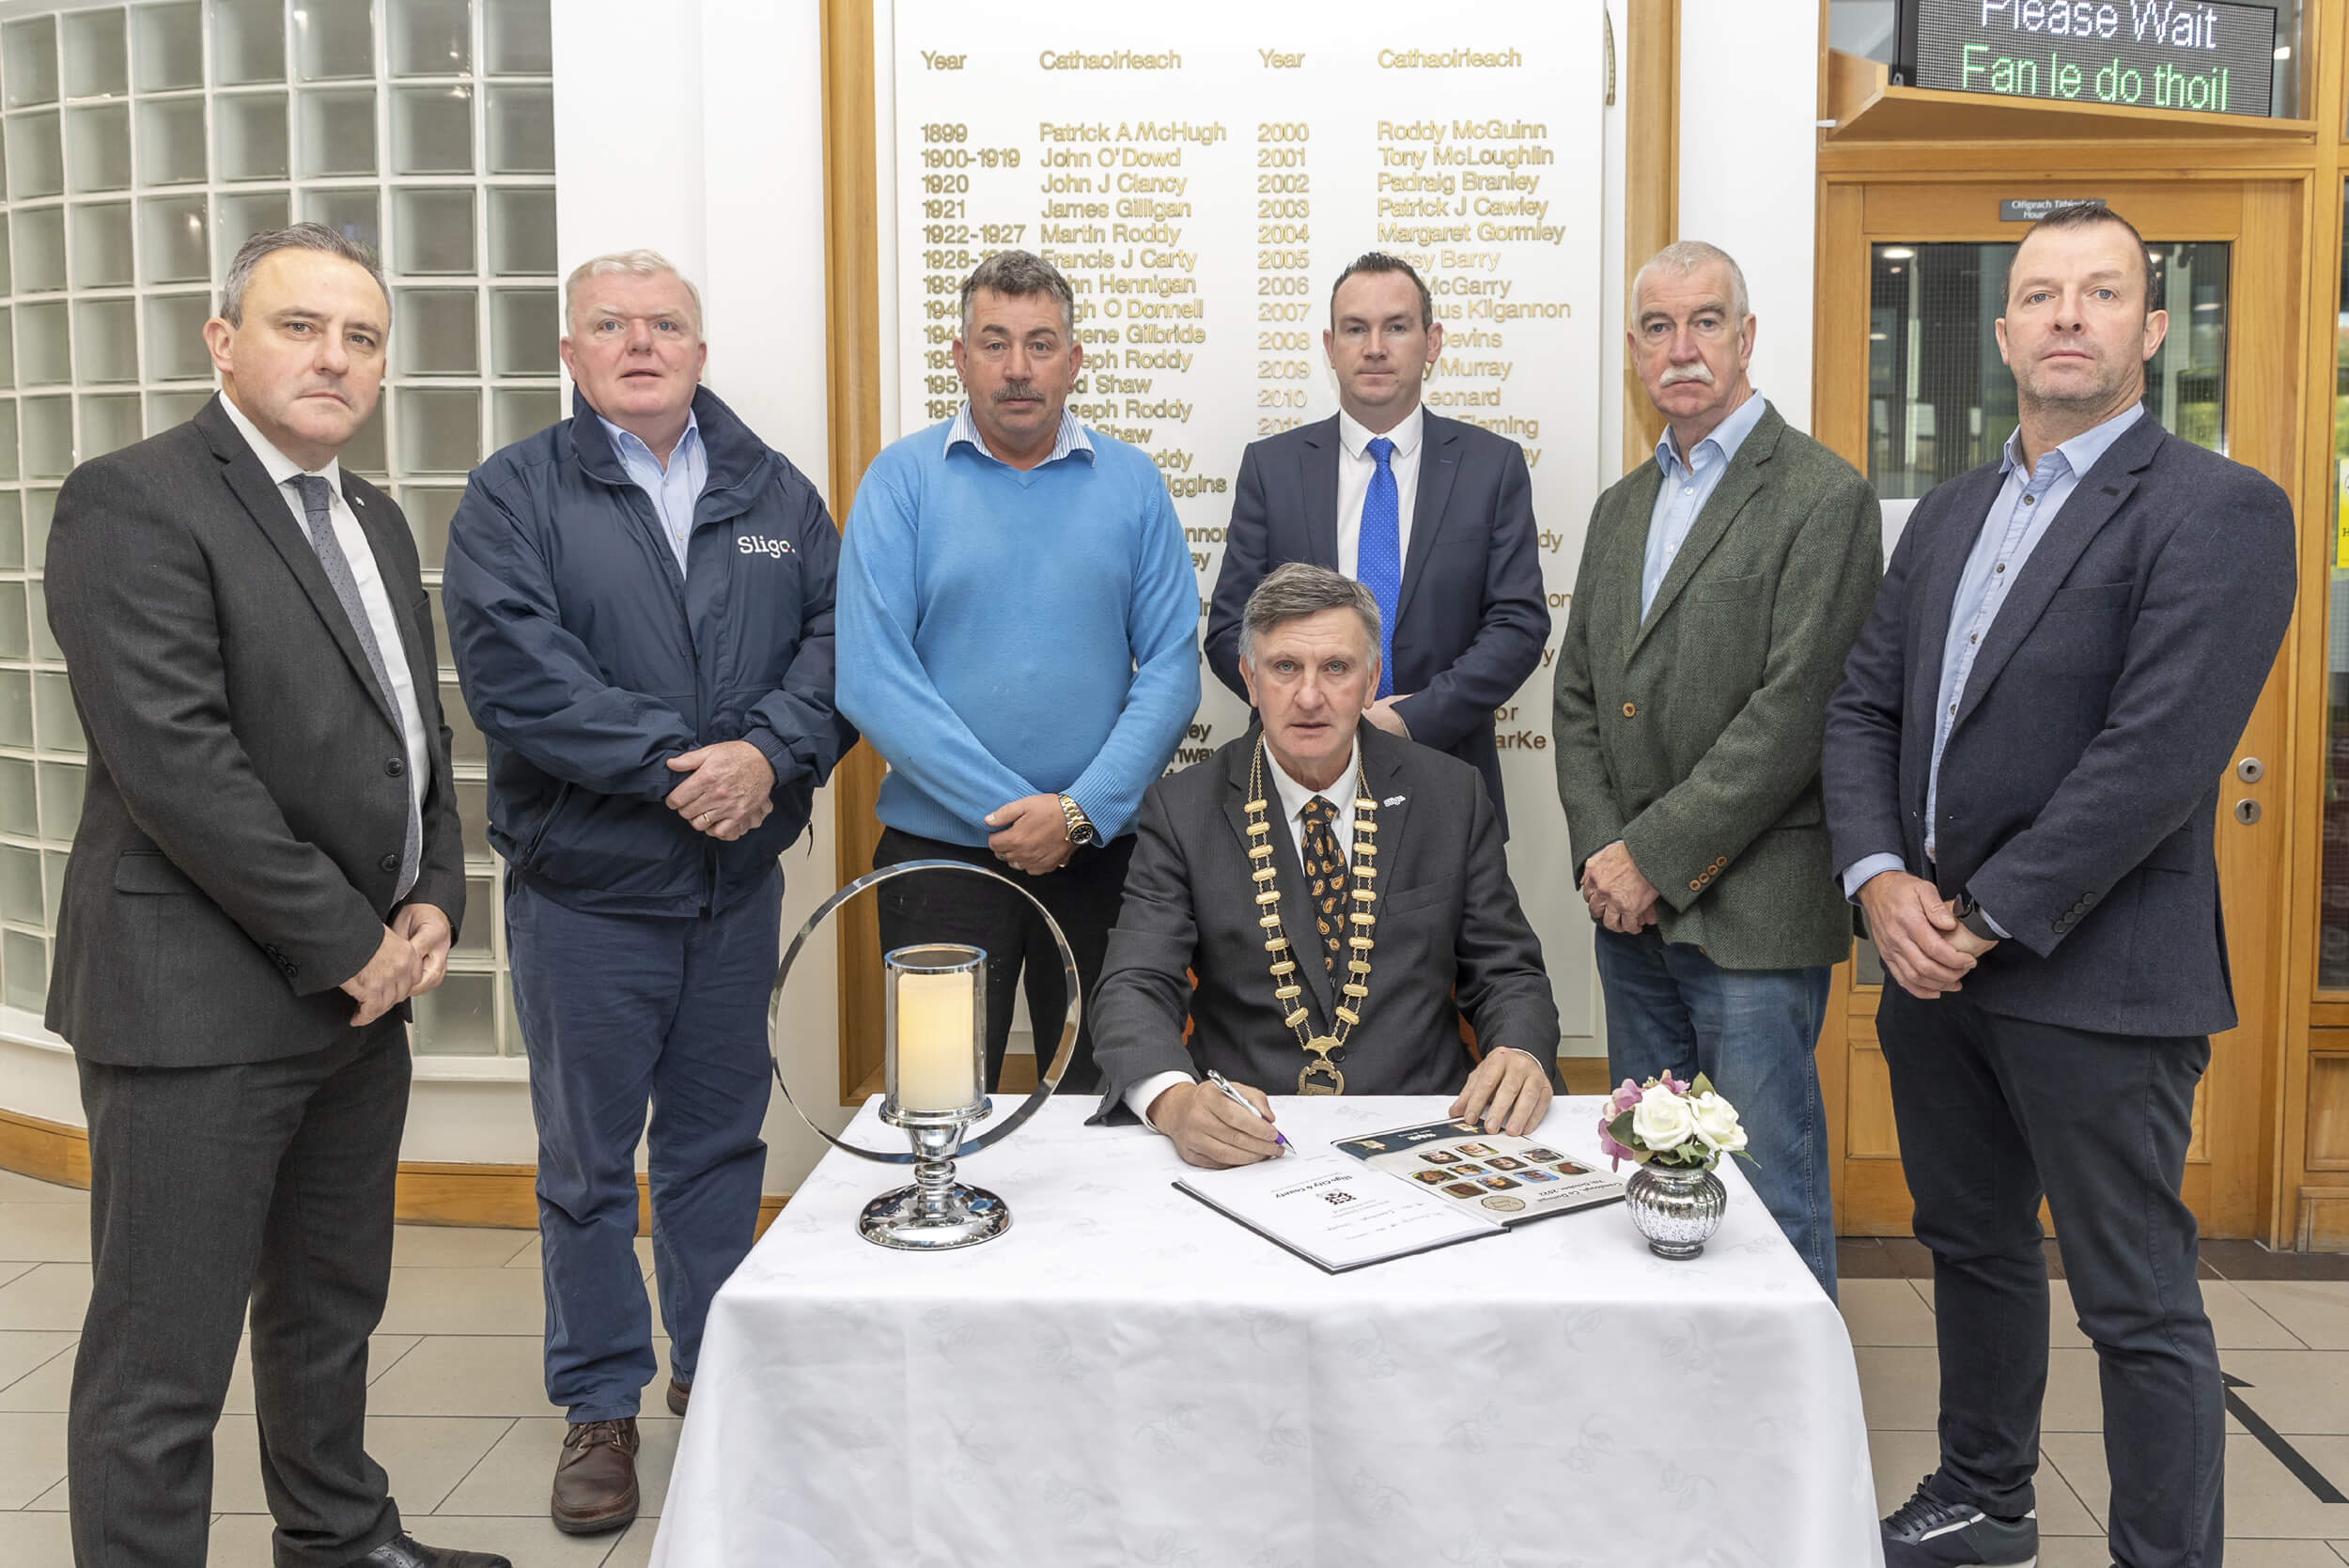 Book of Condolence Opened in memory of Creeslough Victims